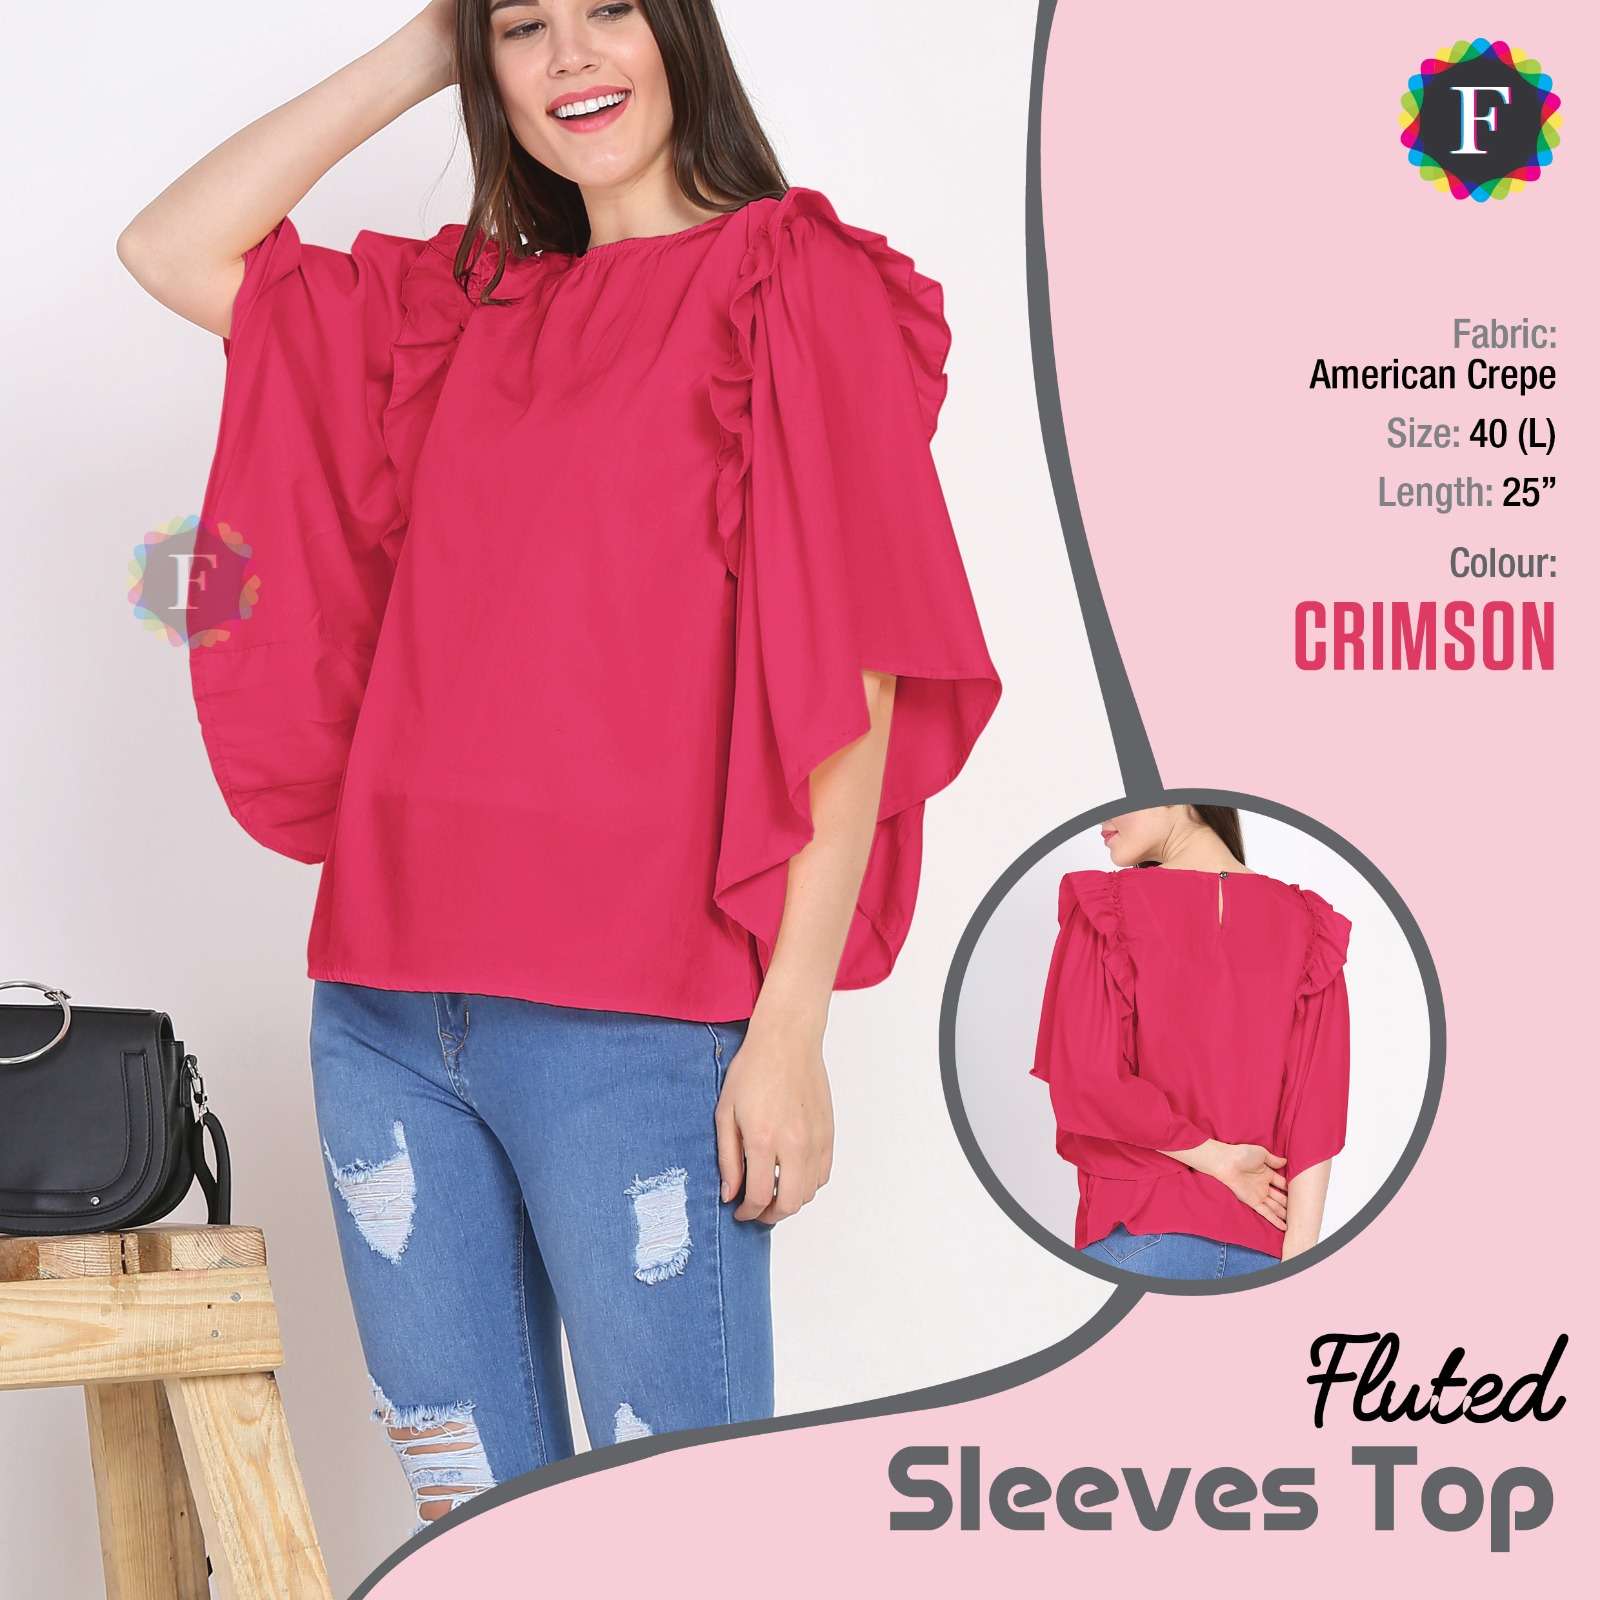 Fluted Sleeves Top Western Style Girls Tops Wholesaler